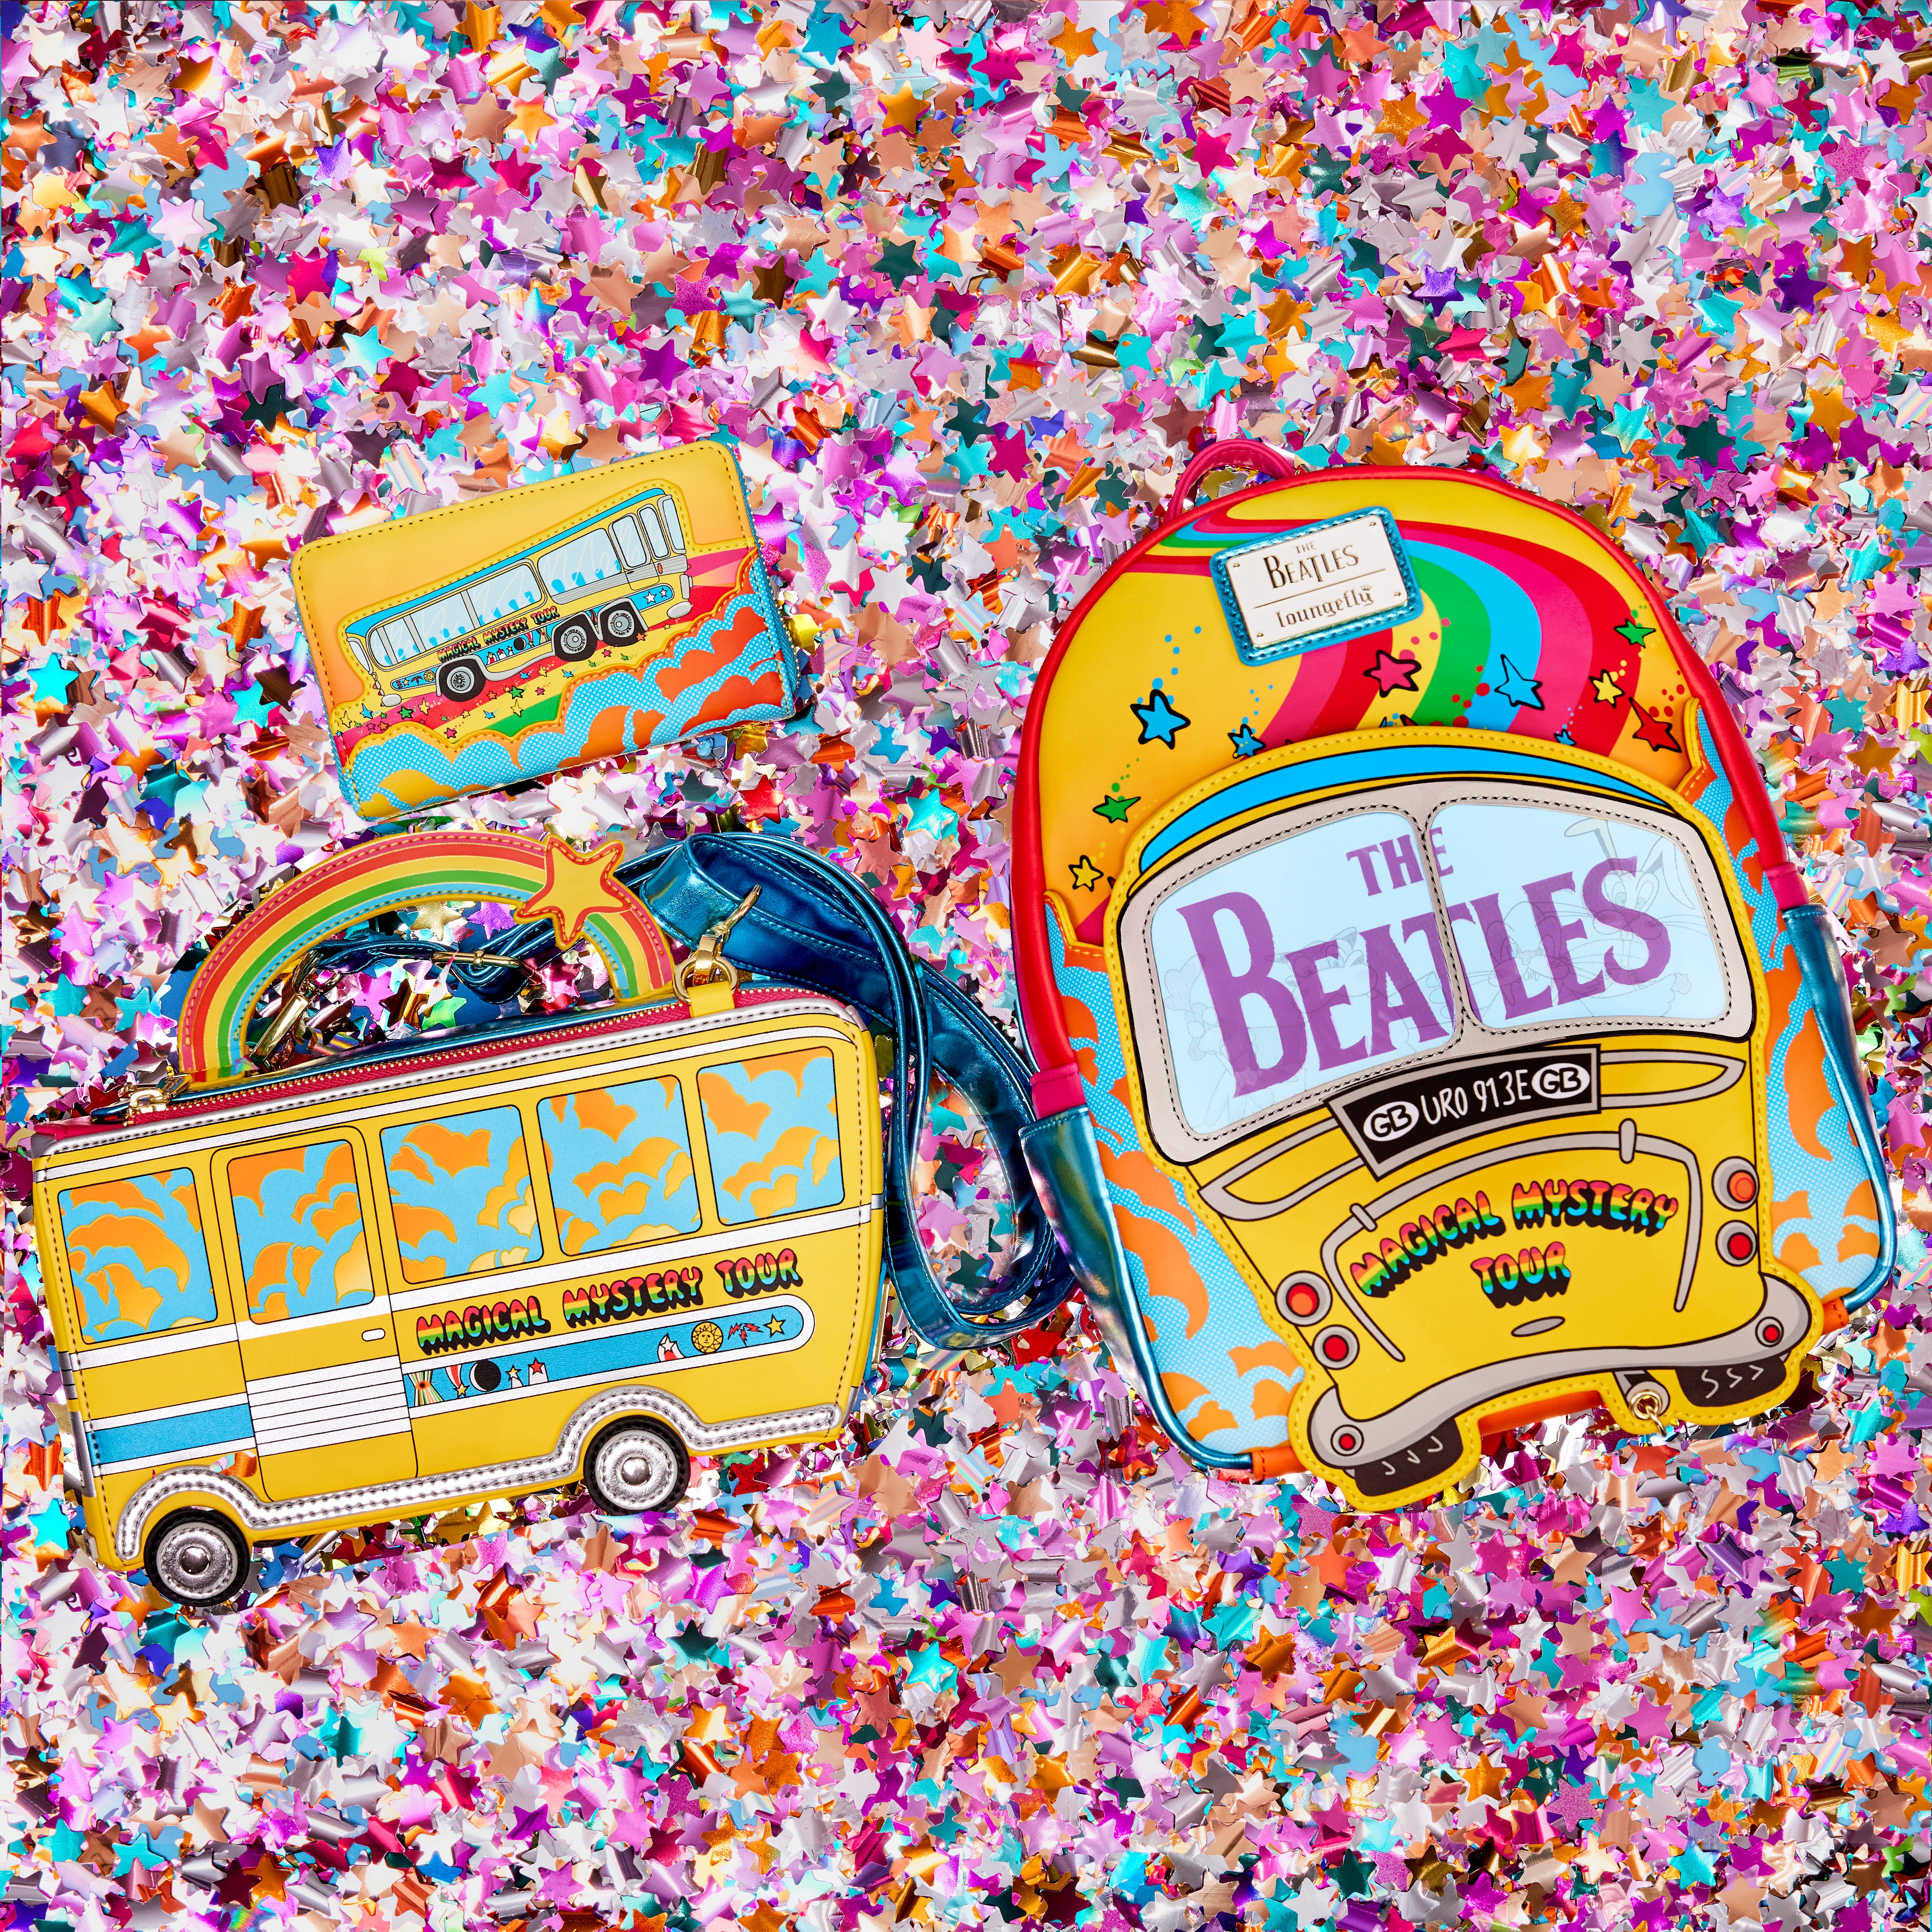 The Beatles x Loungefly Magical Mystery Tour Bus Crossbody Bag Collection